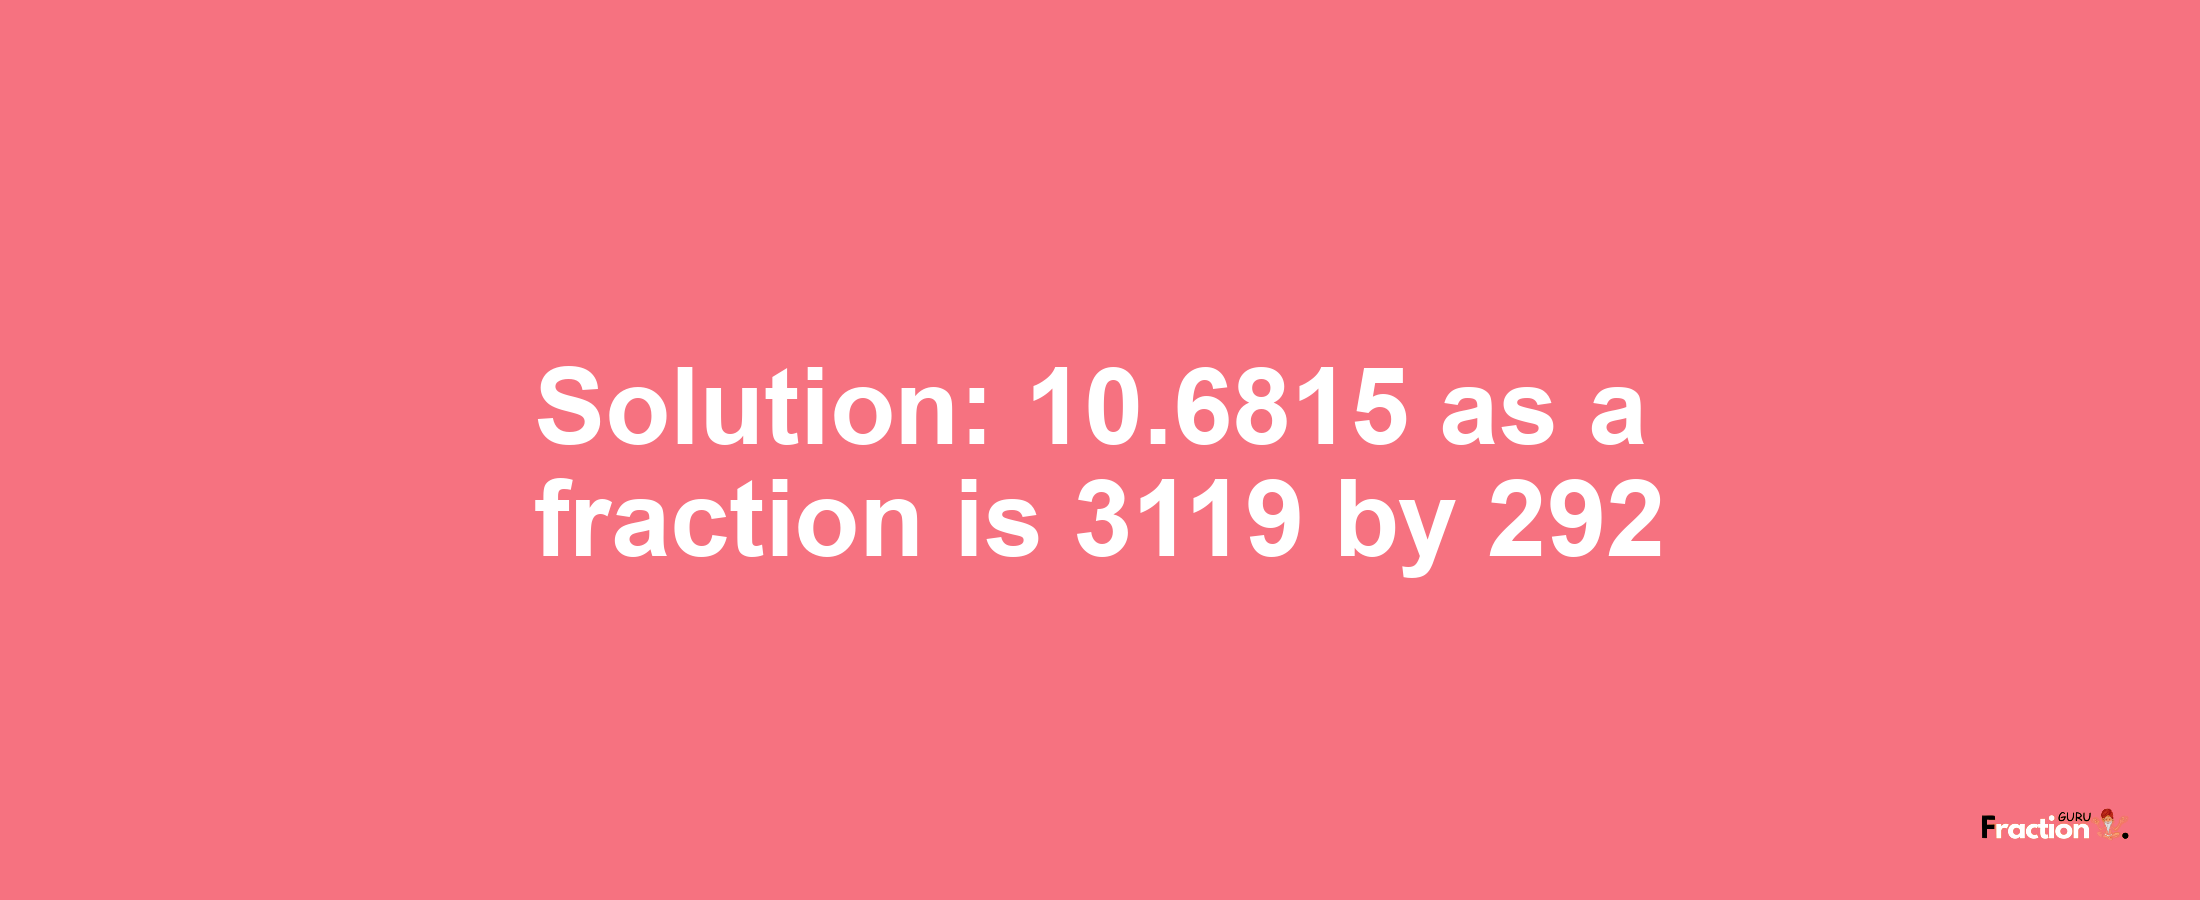 Solution:10.6815 as a fraction is 3119/292